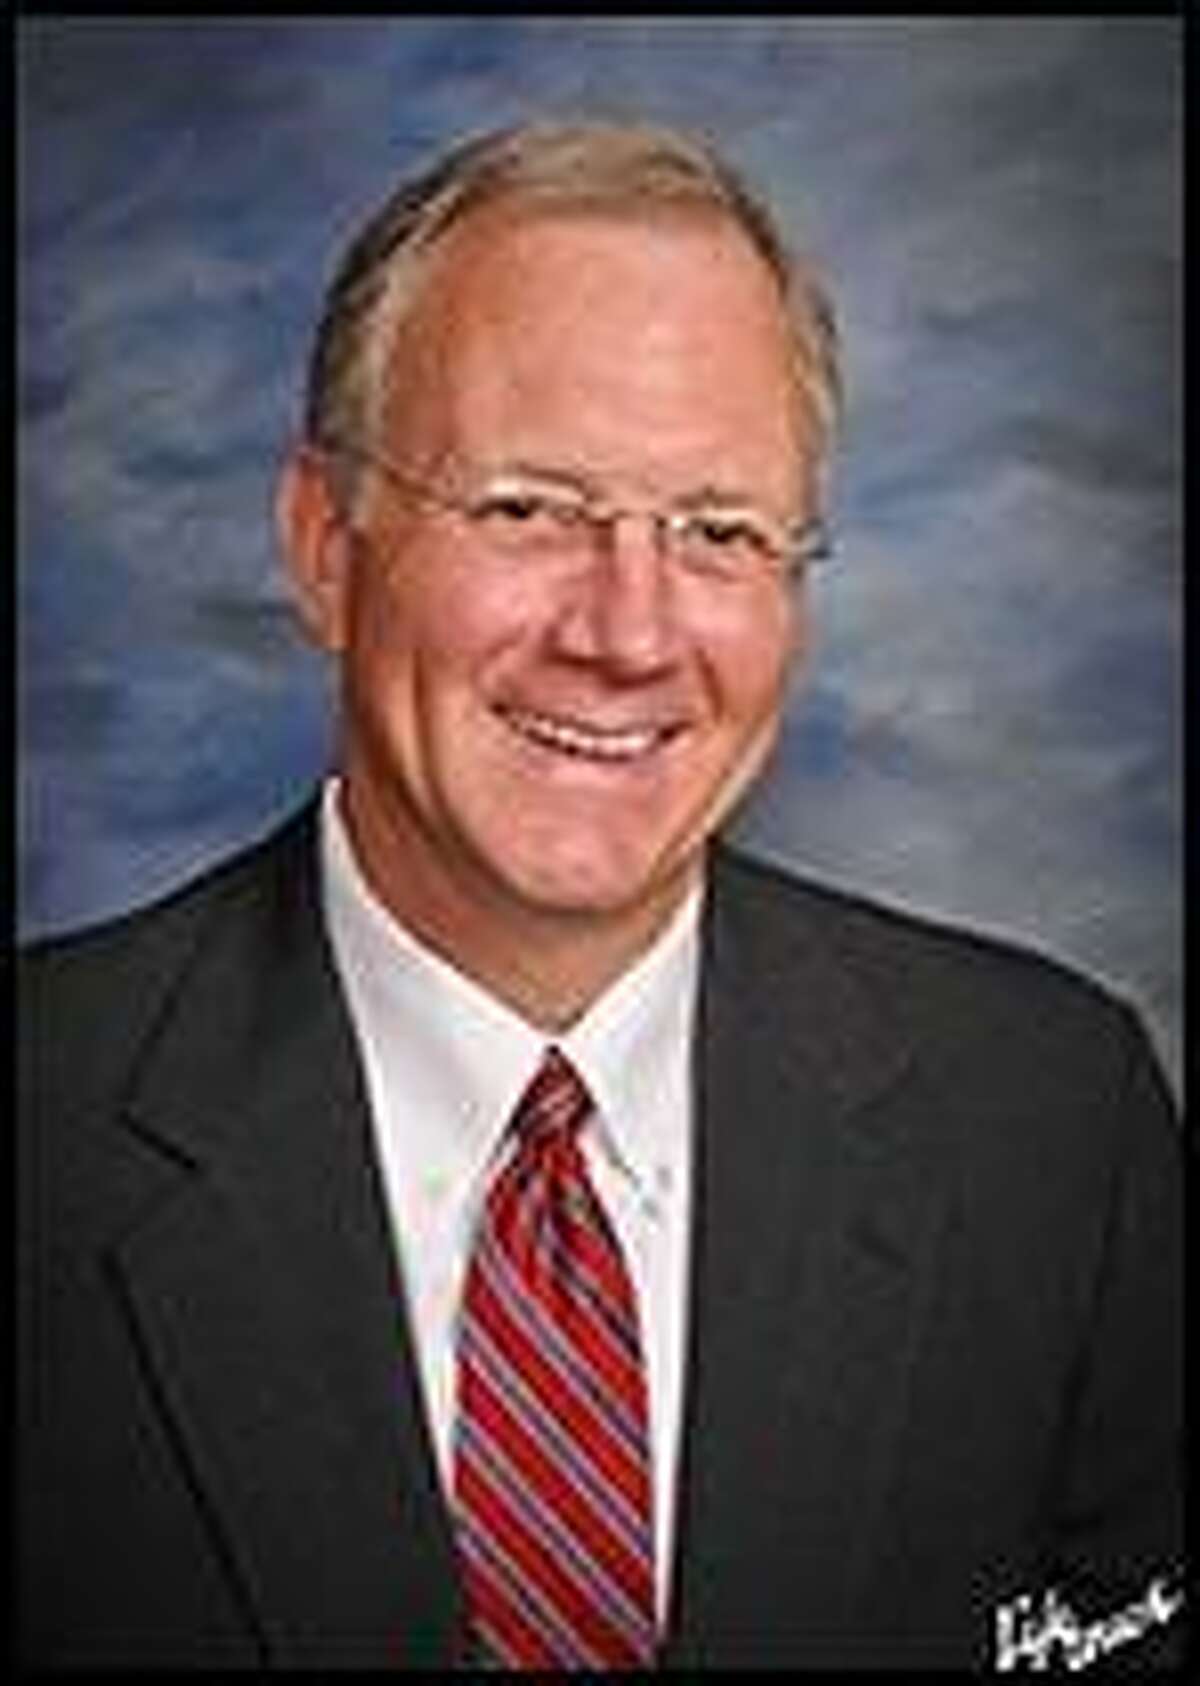 Steve Smith is president of the Comal Independent School District Board of Trustees.